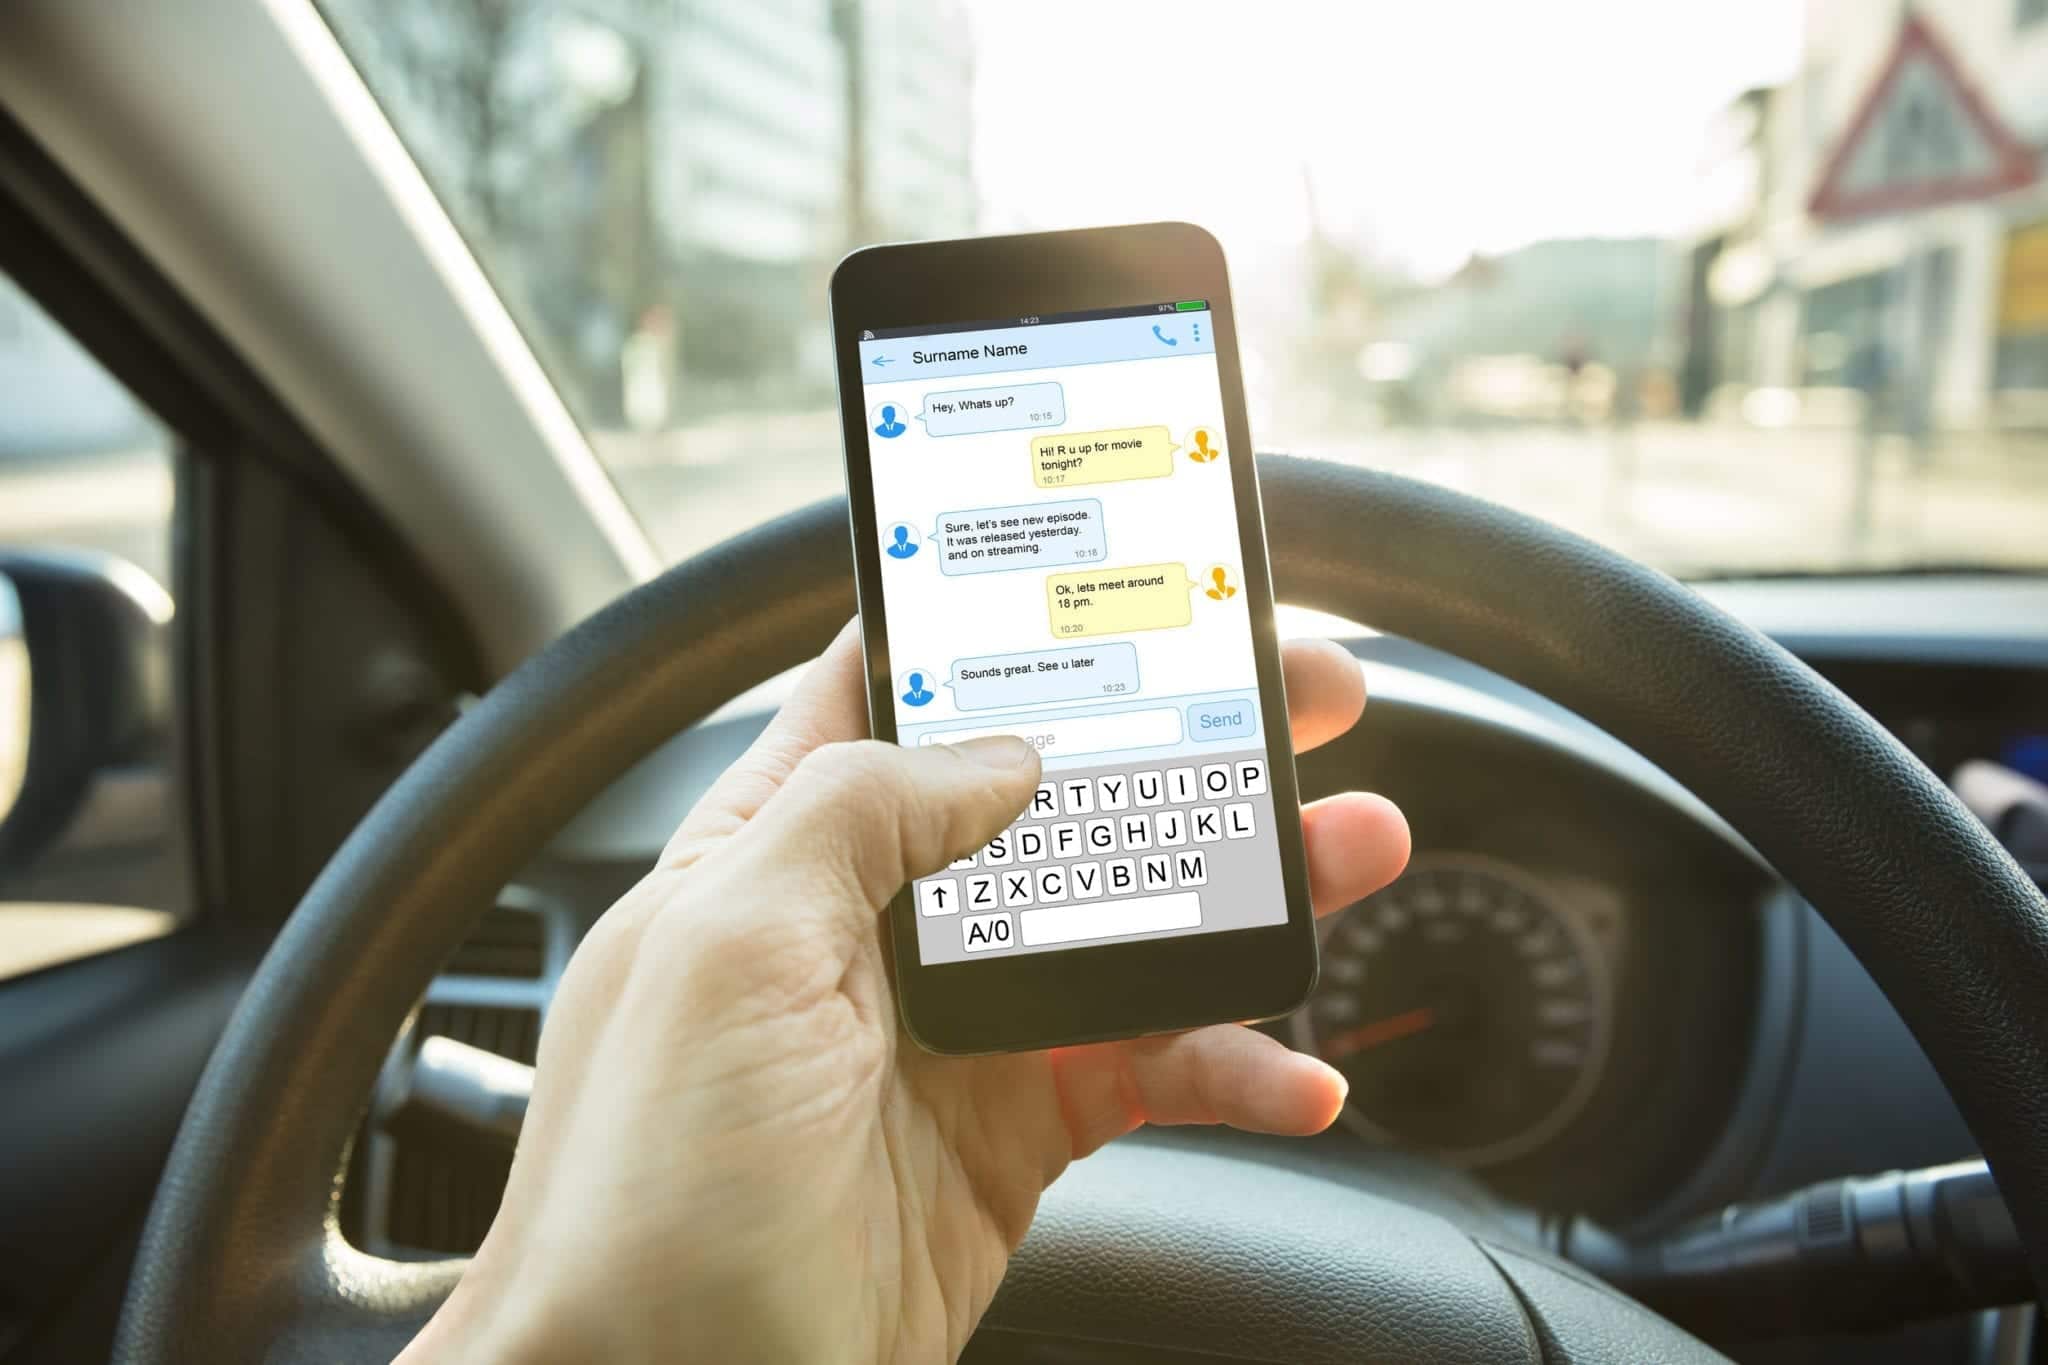 How Floridians Can Stop Using Their Phone While Driving